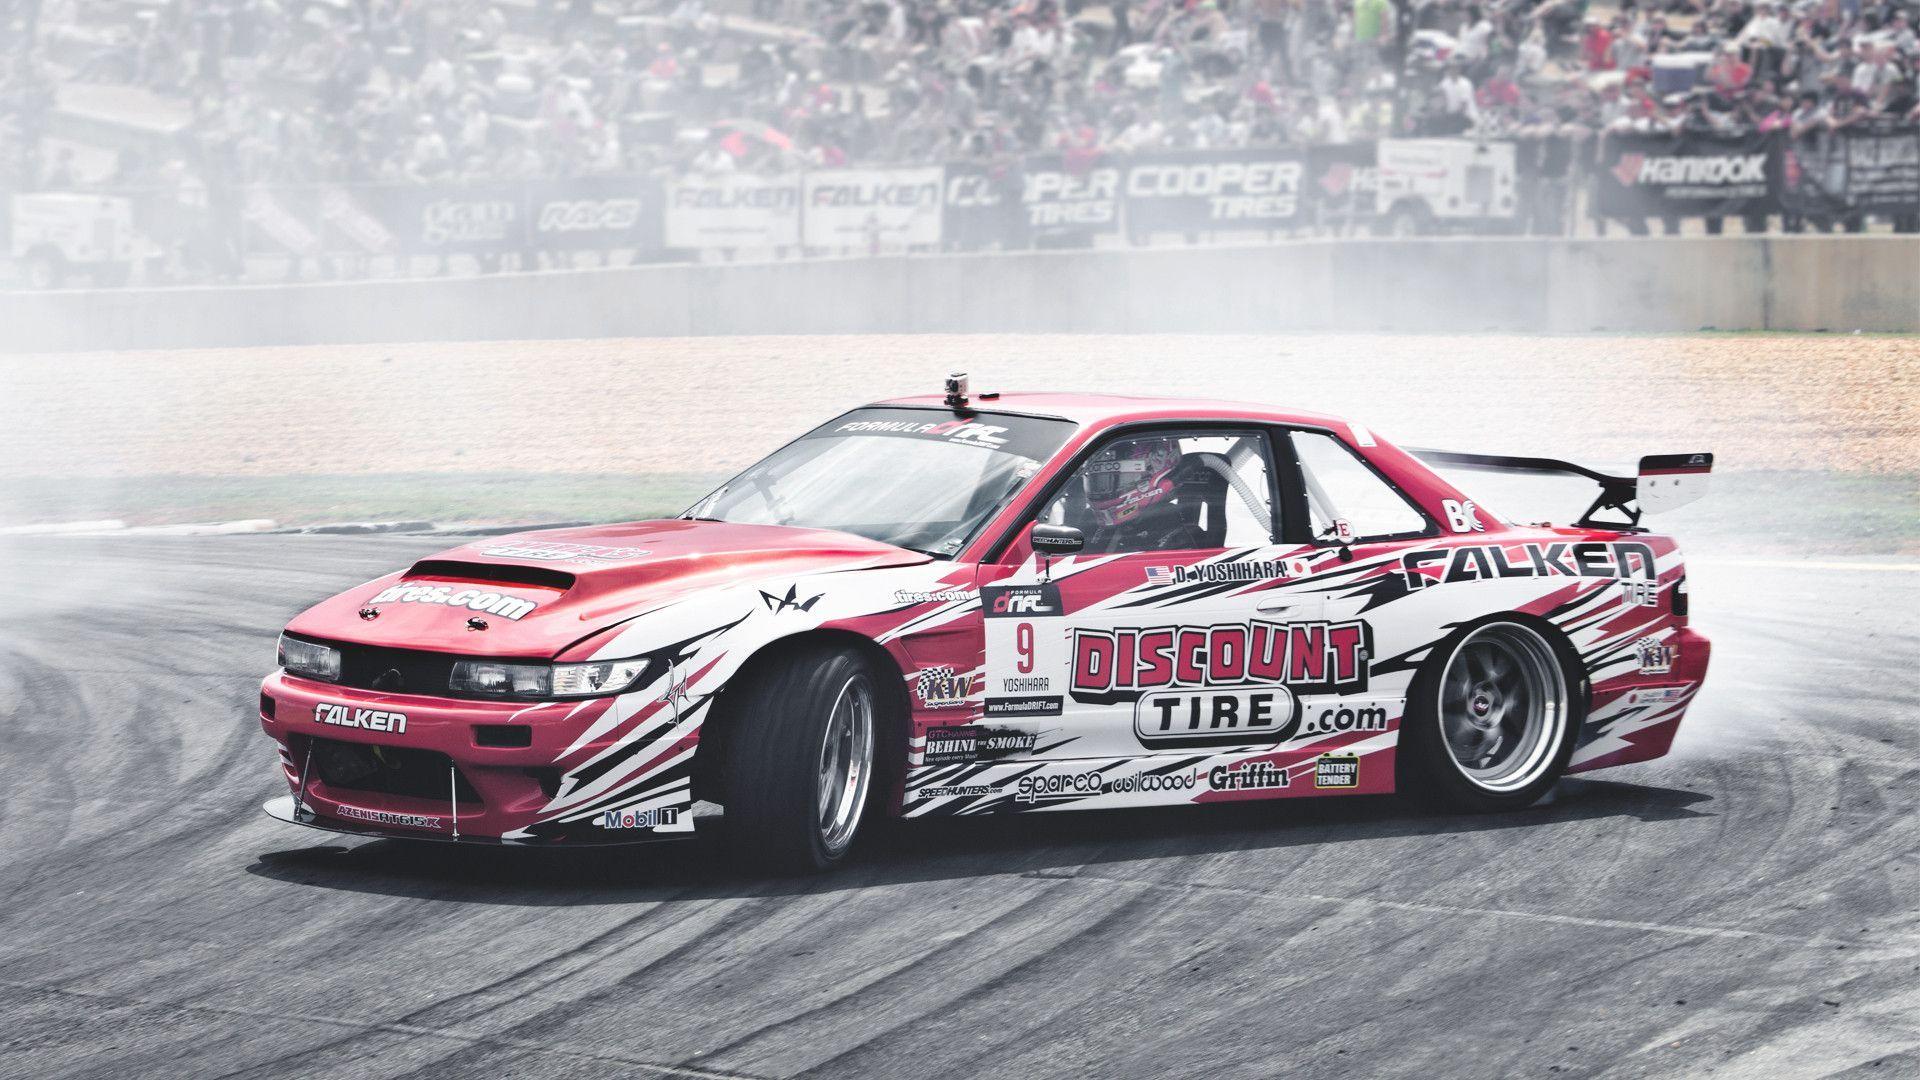 Drifting Cars Hd Wallpapers For Pc